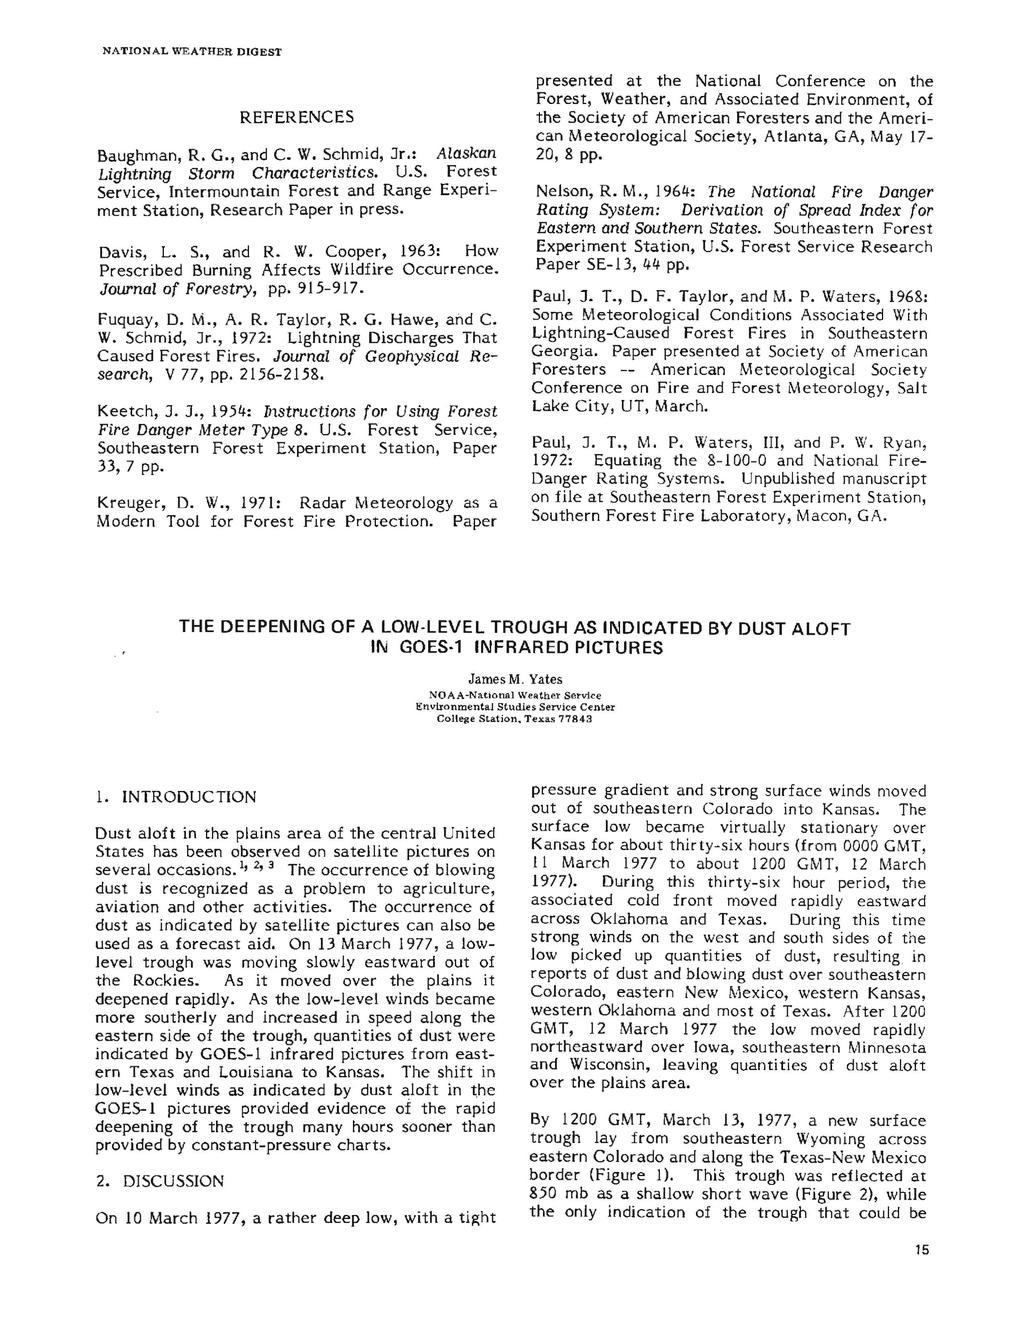 REFERENCES Baughman, R. G., and C. W. Schmid, Jr.: Lightning Storm Characteristics. U.S. Service, Intermountain Forest and Range ment Station, Research Paper in press. Davis, L. S., and R. W. Cooper, 1963: How Prescribed Burning Affects Wildfire Occurrence.